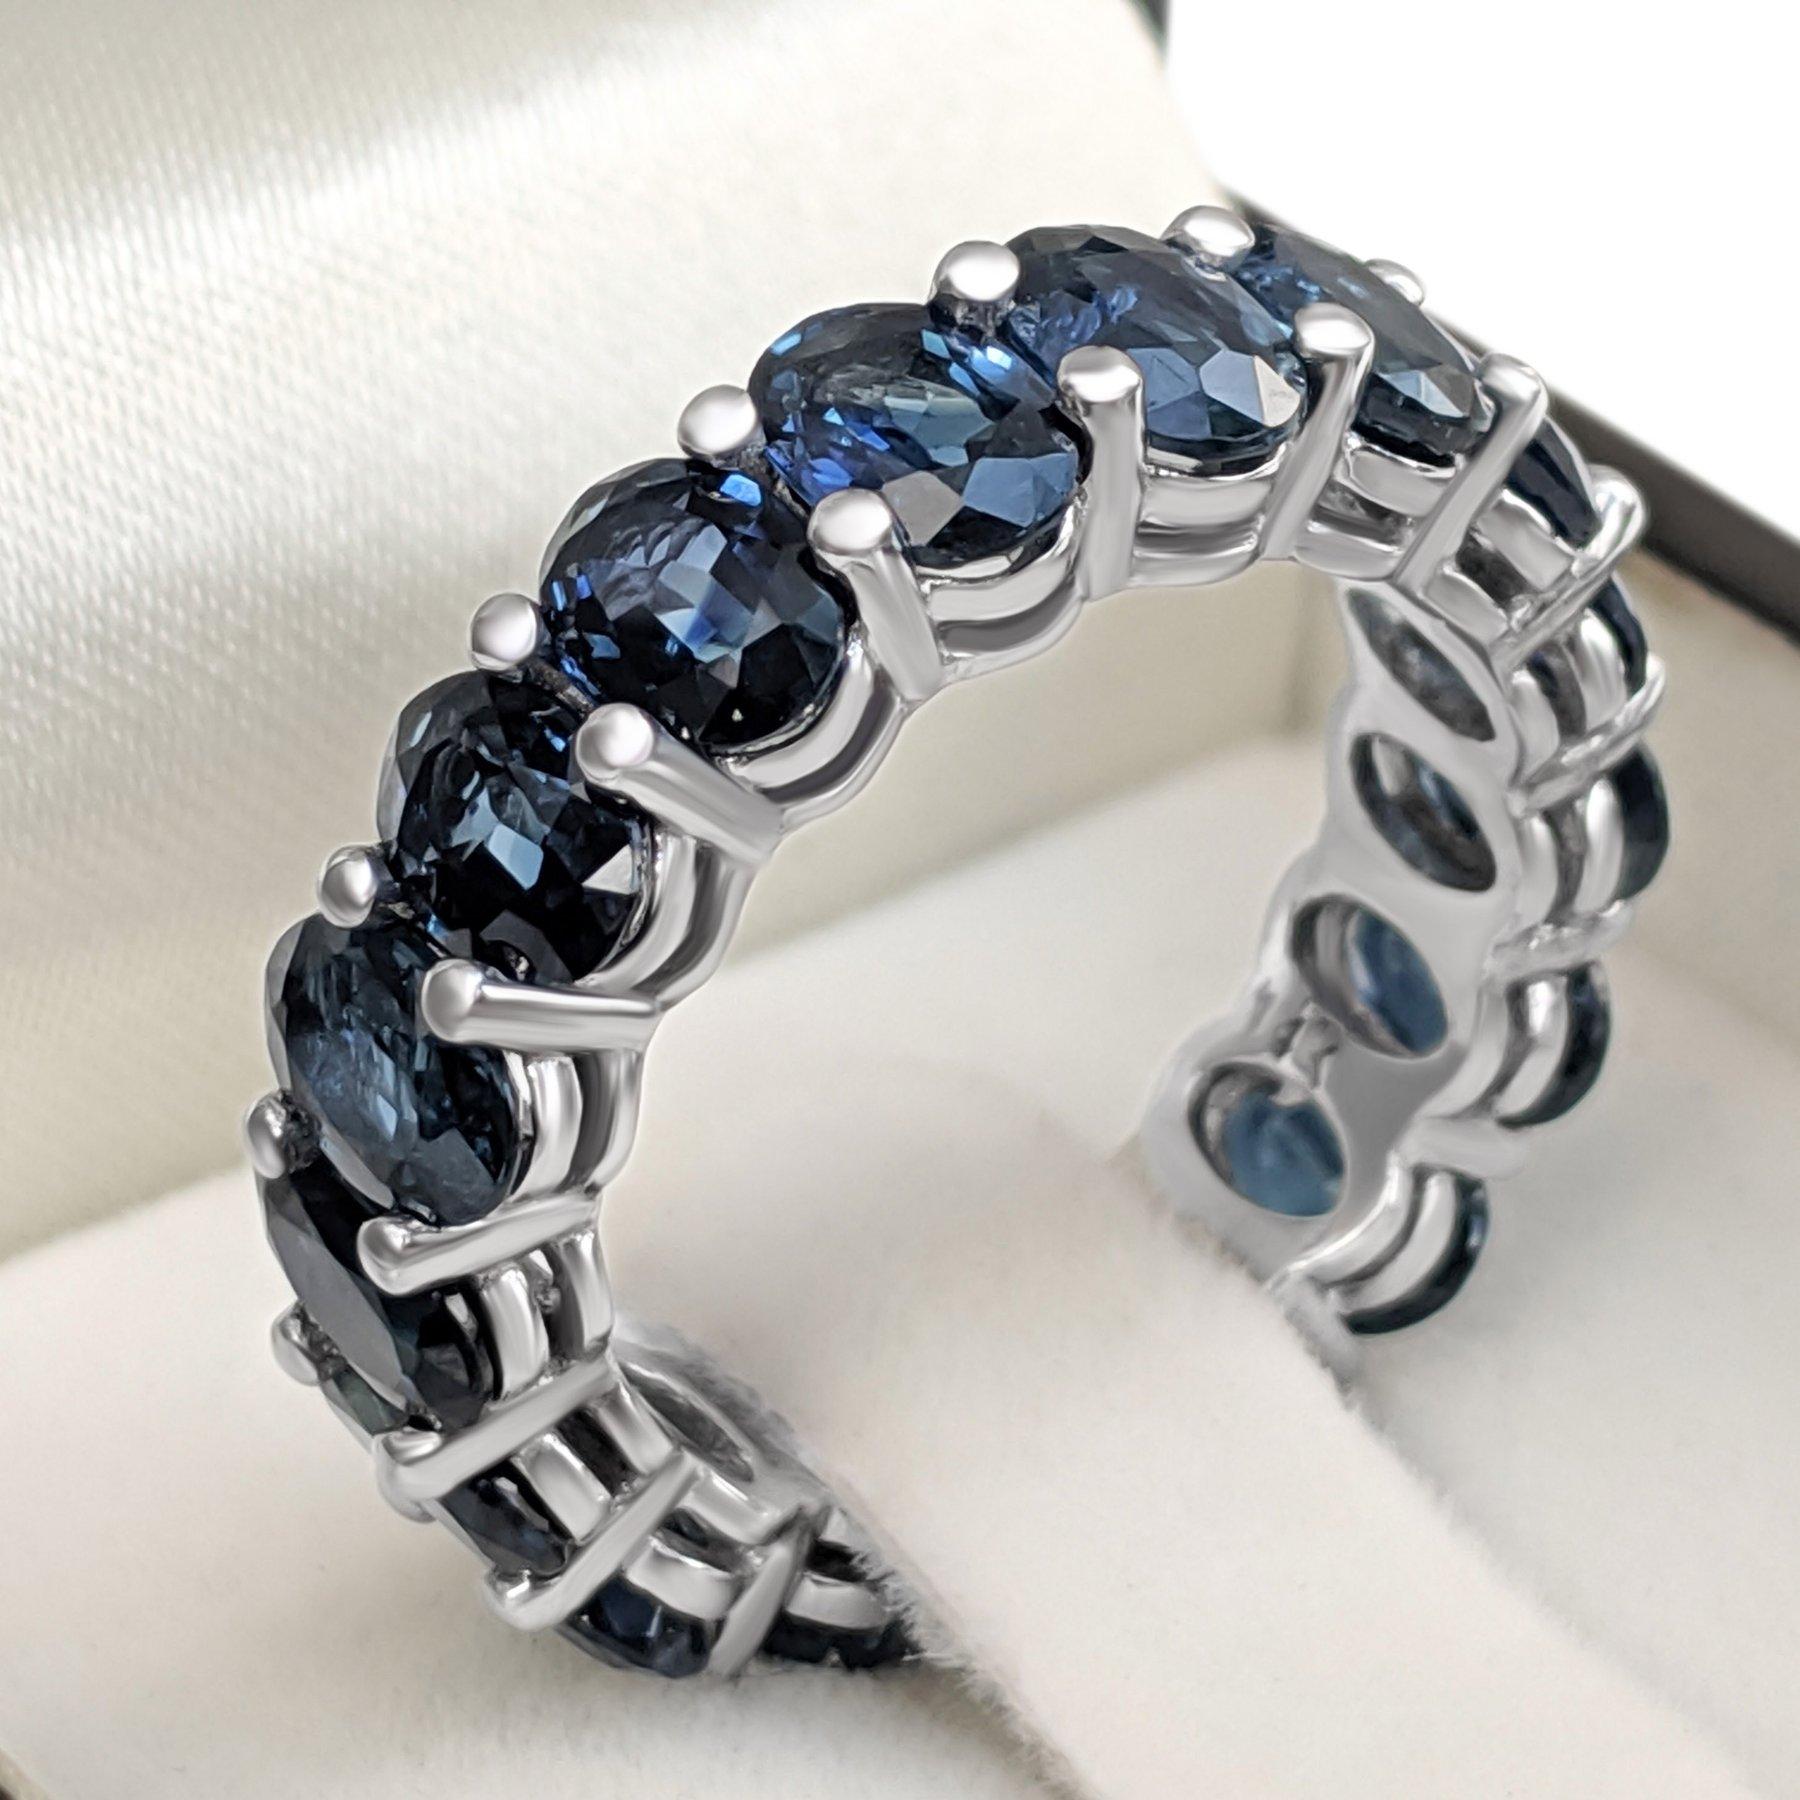 Women's NO RESERVE! 9.93 Carat Sapphire Eternity Band - 14 kt. White Gold - Ring For Sale